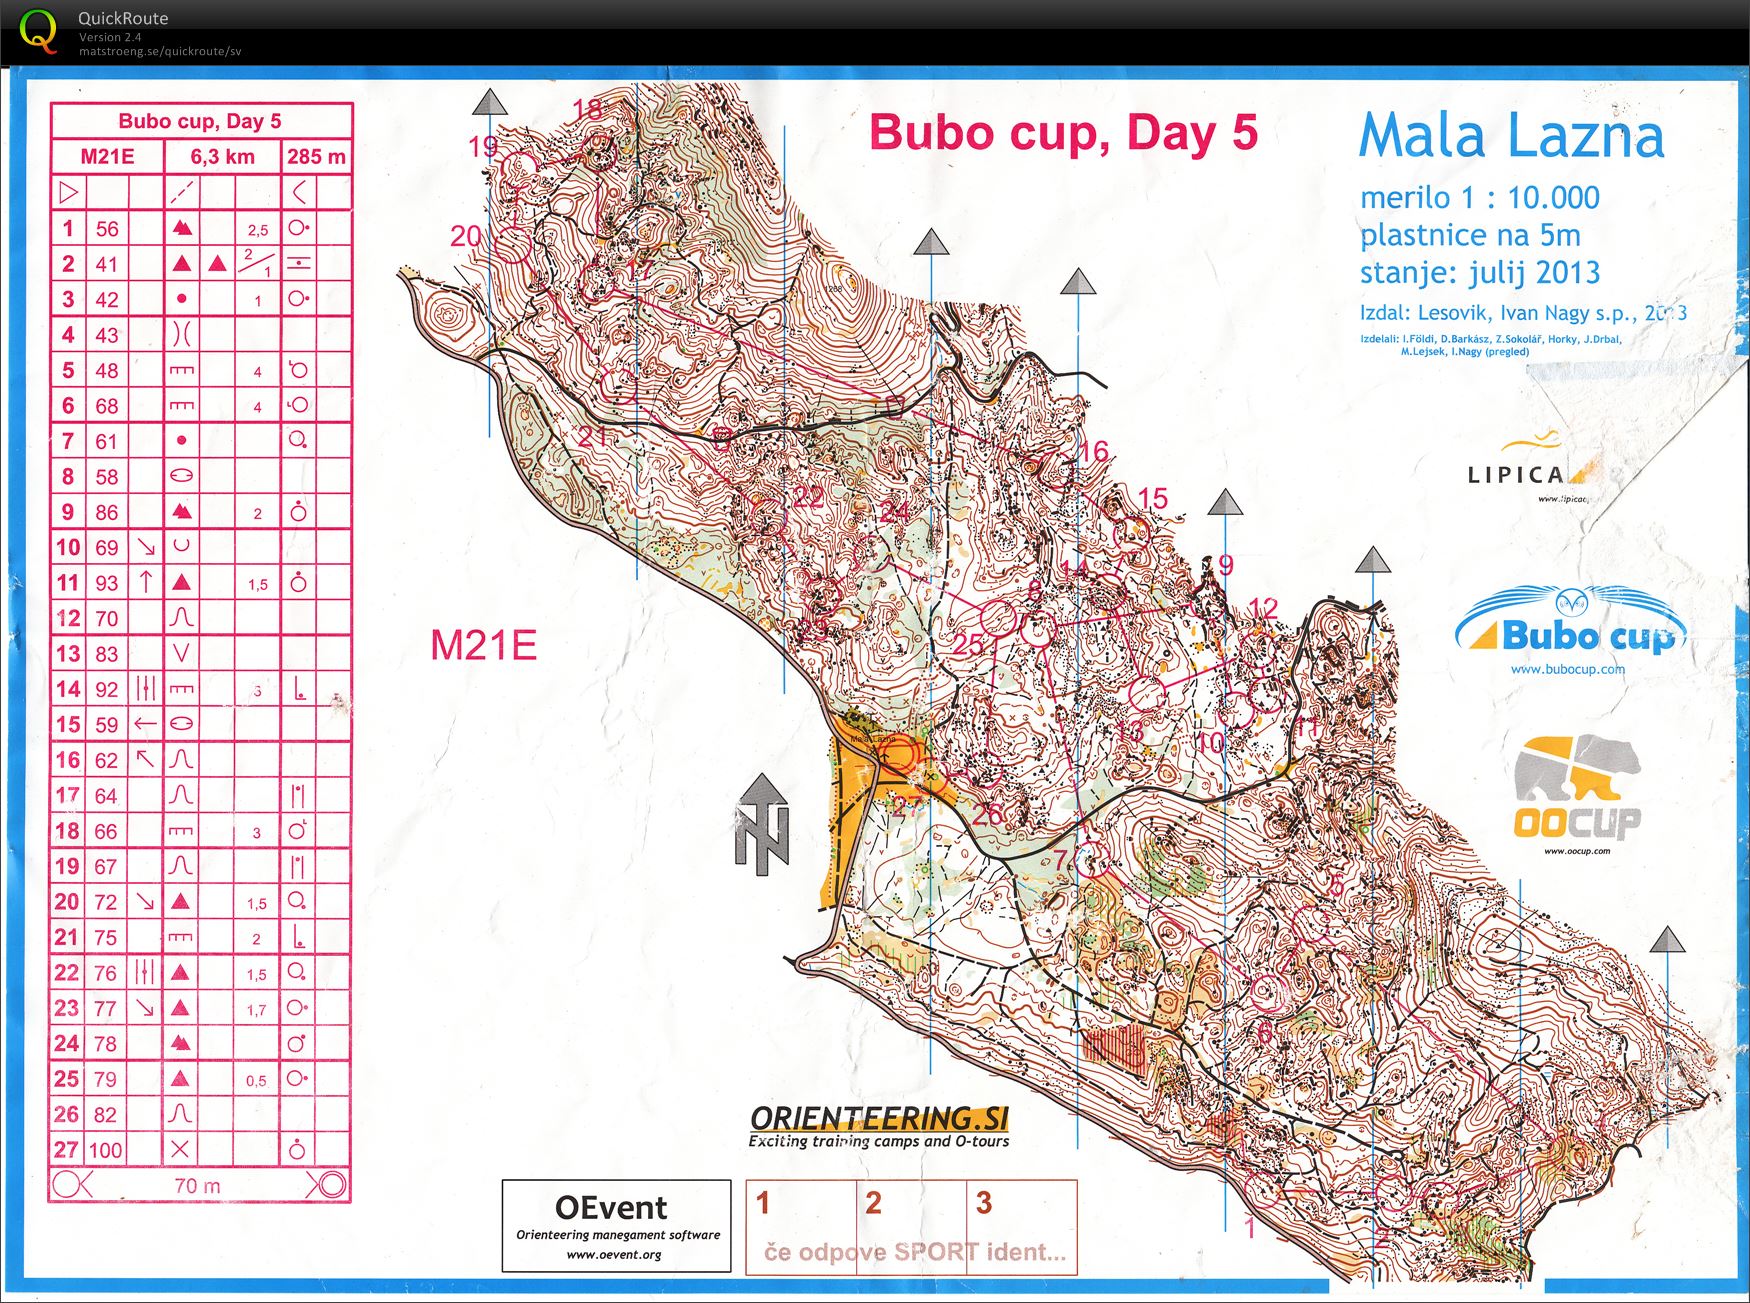 Bubo cup, Day 5 (23.07.2013)